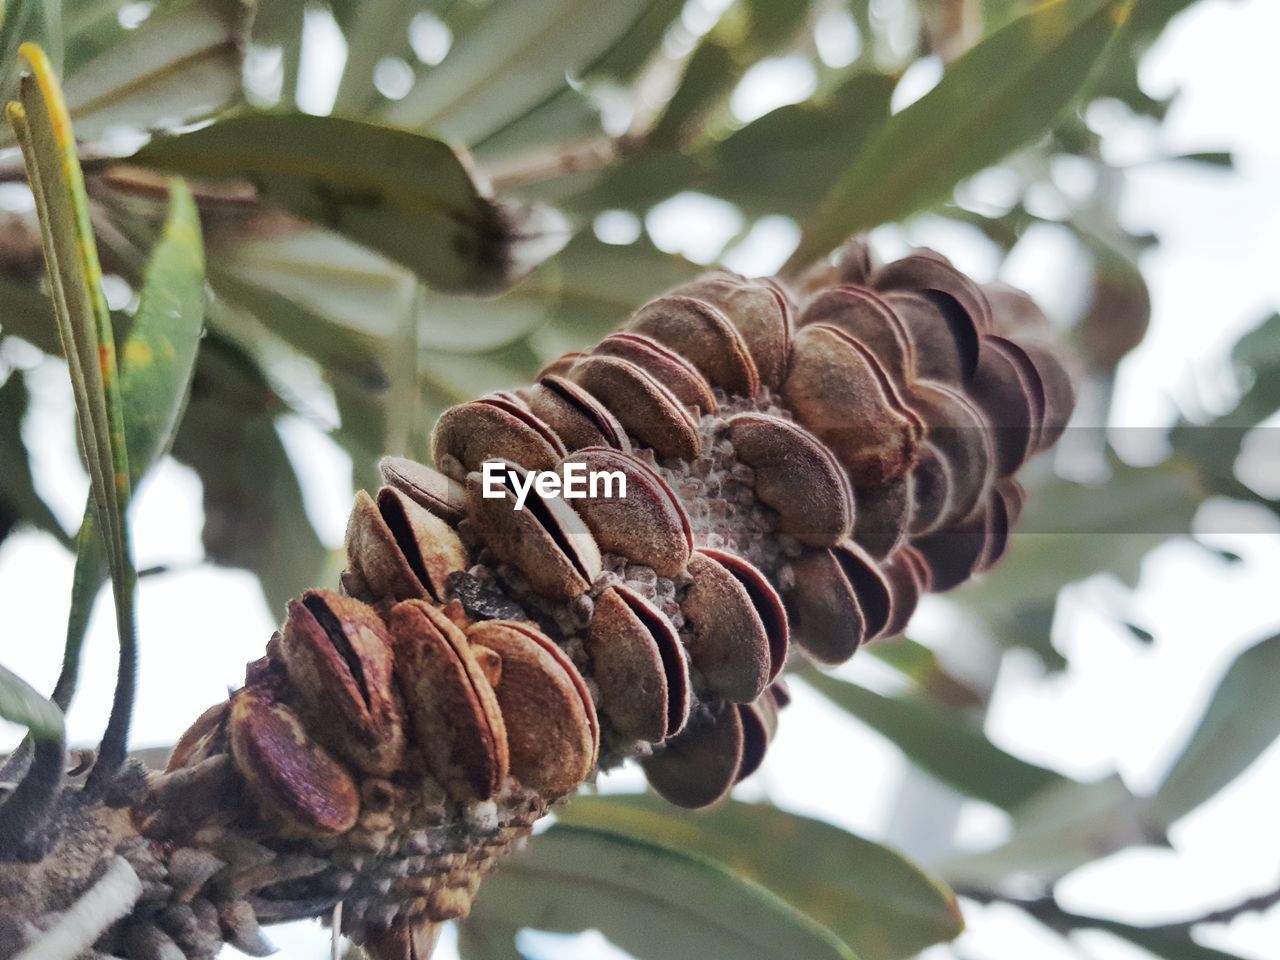 CLOSE-UP OF PINE CONES ON LEAVES